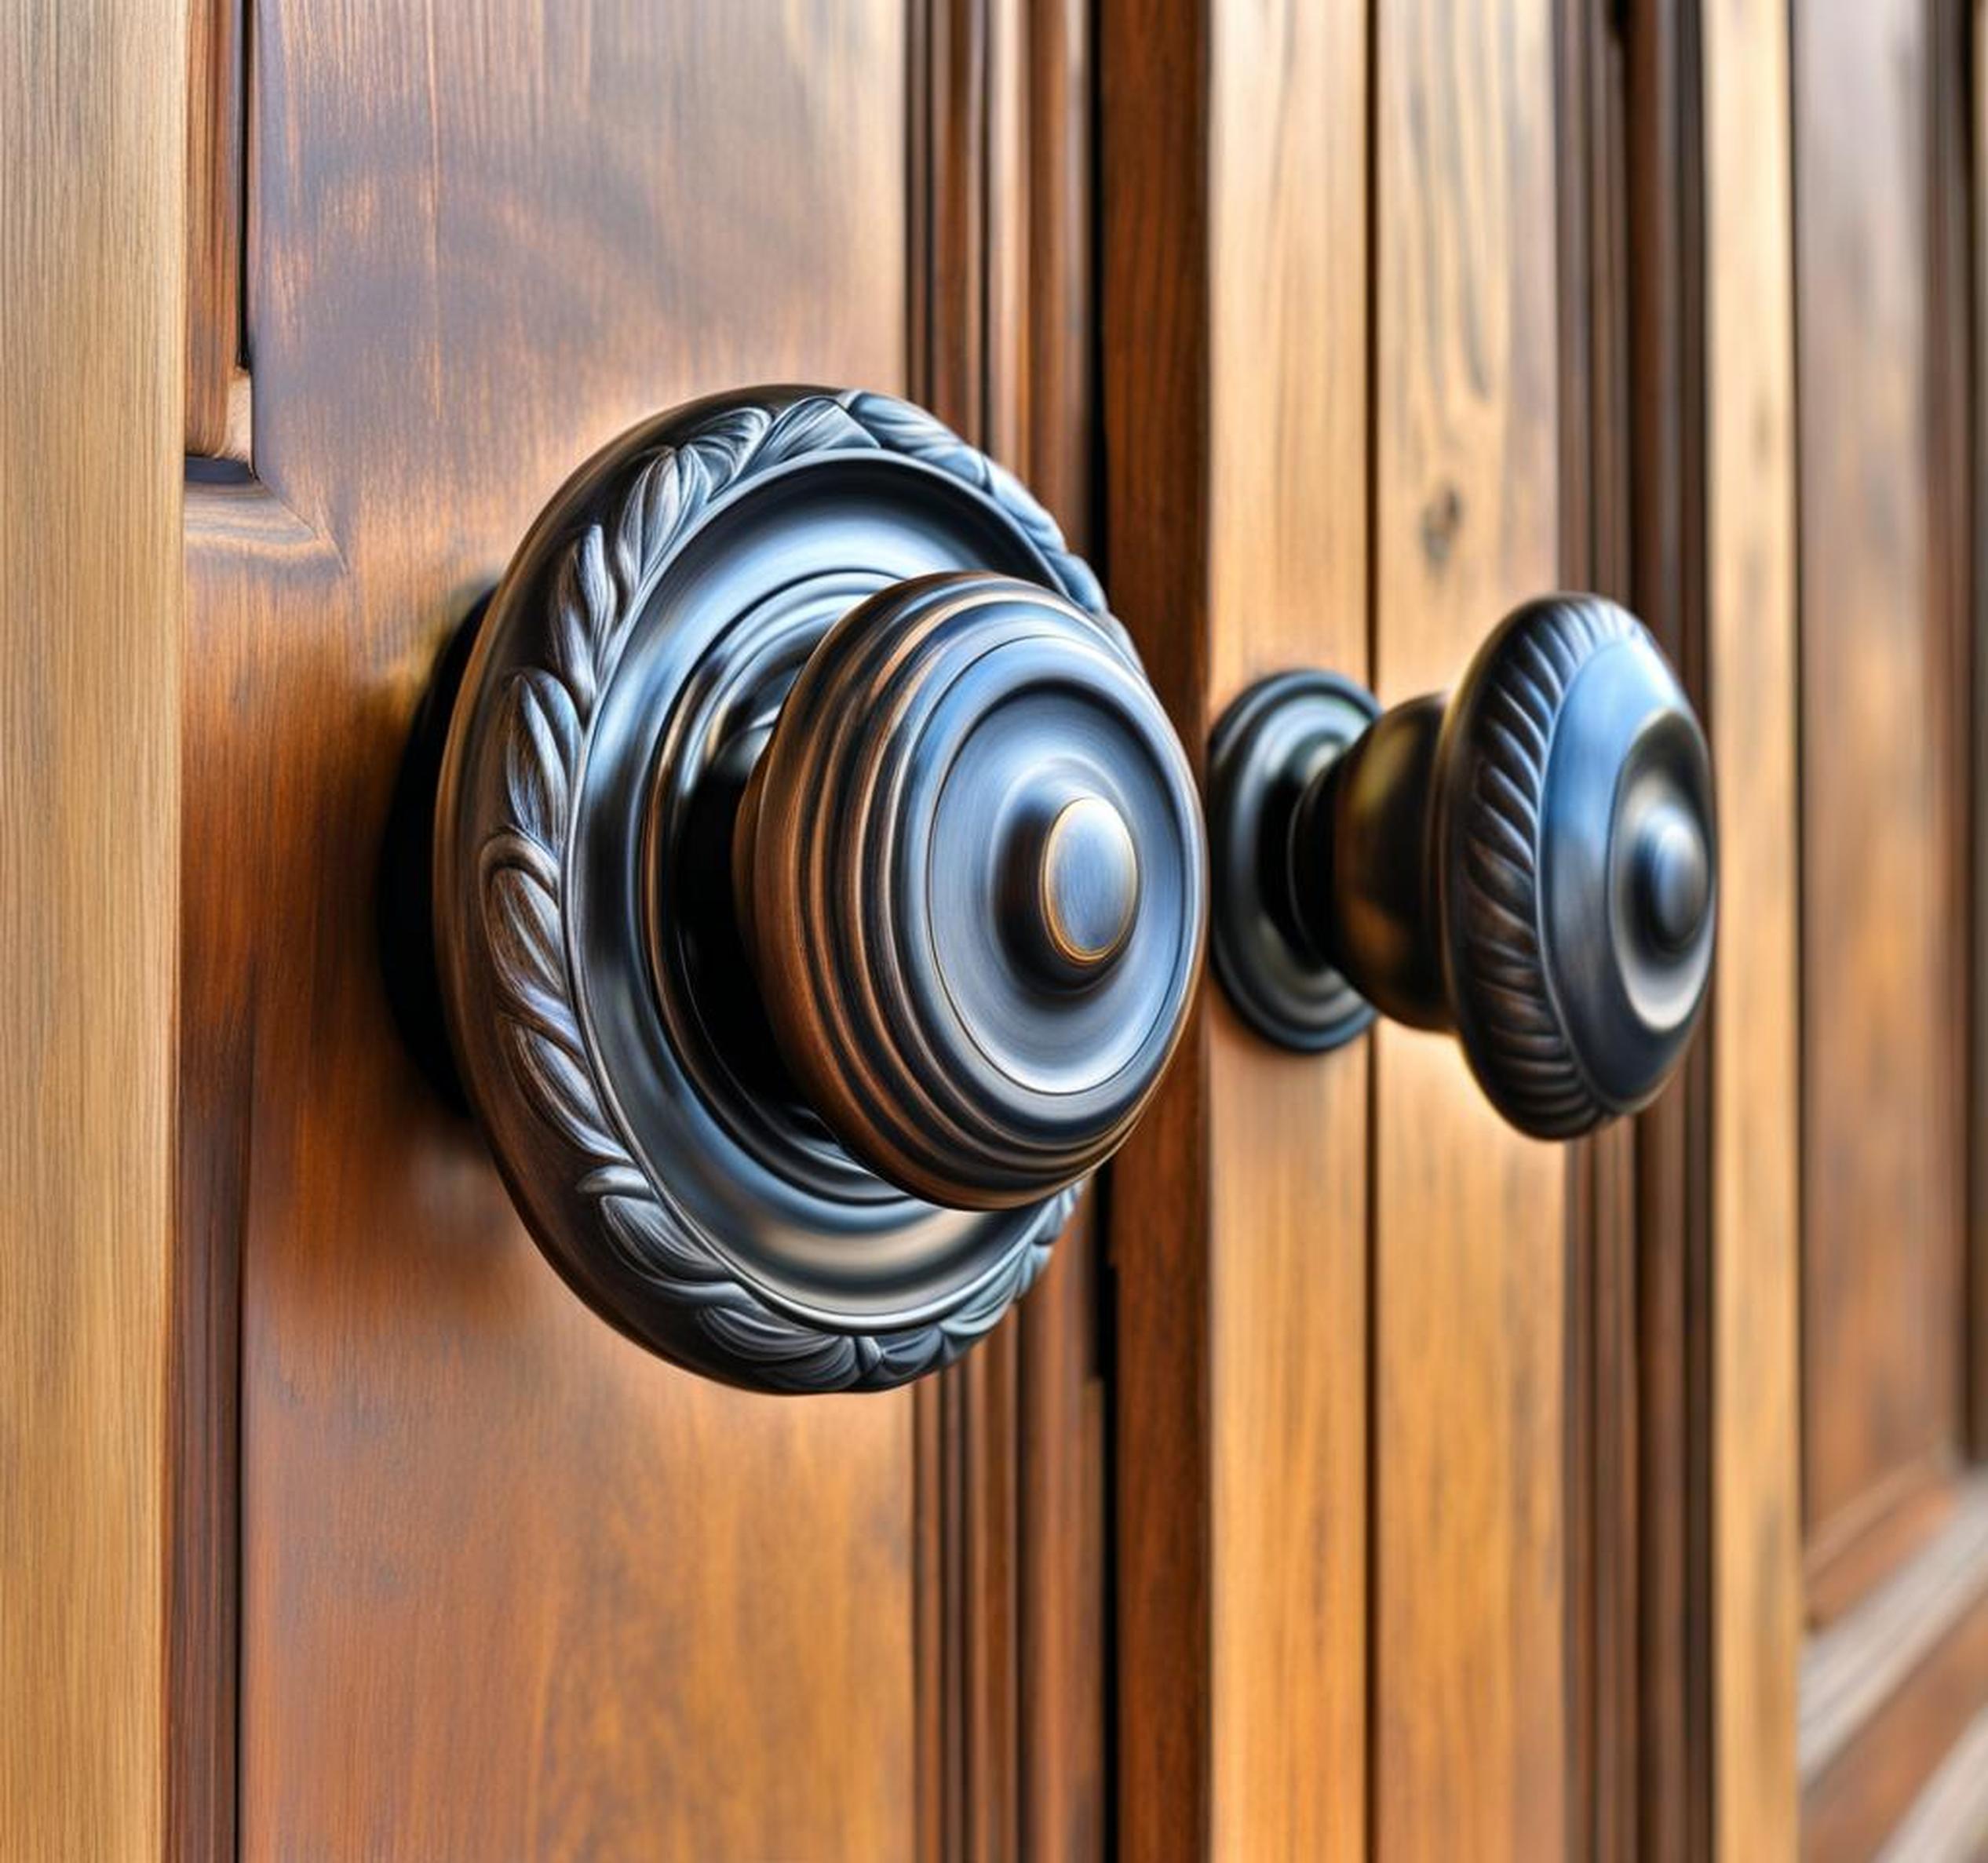 The Rustic Door Knobs Perfect for a Relaxed Farmhouse Look